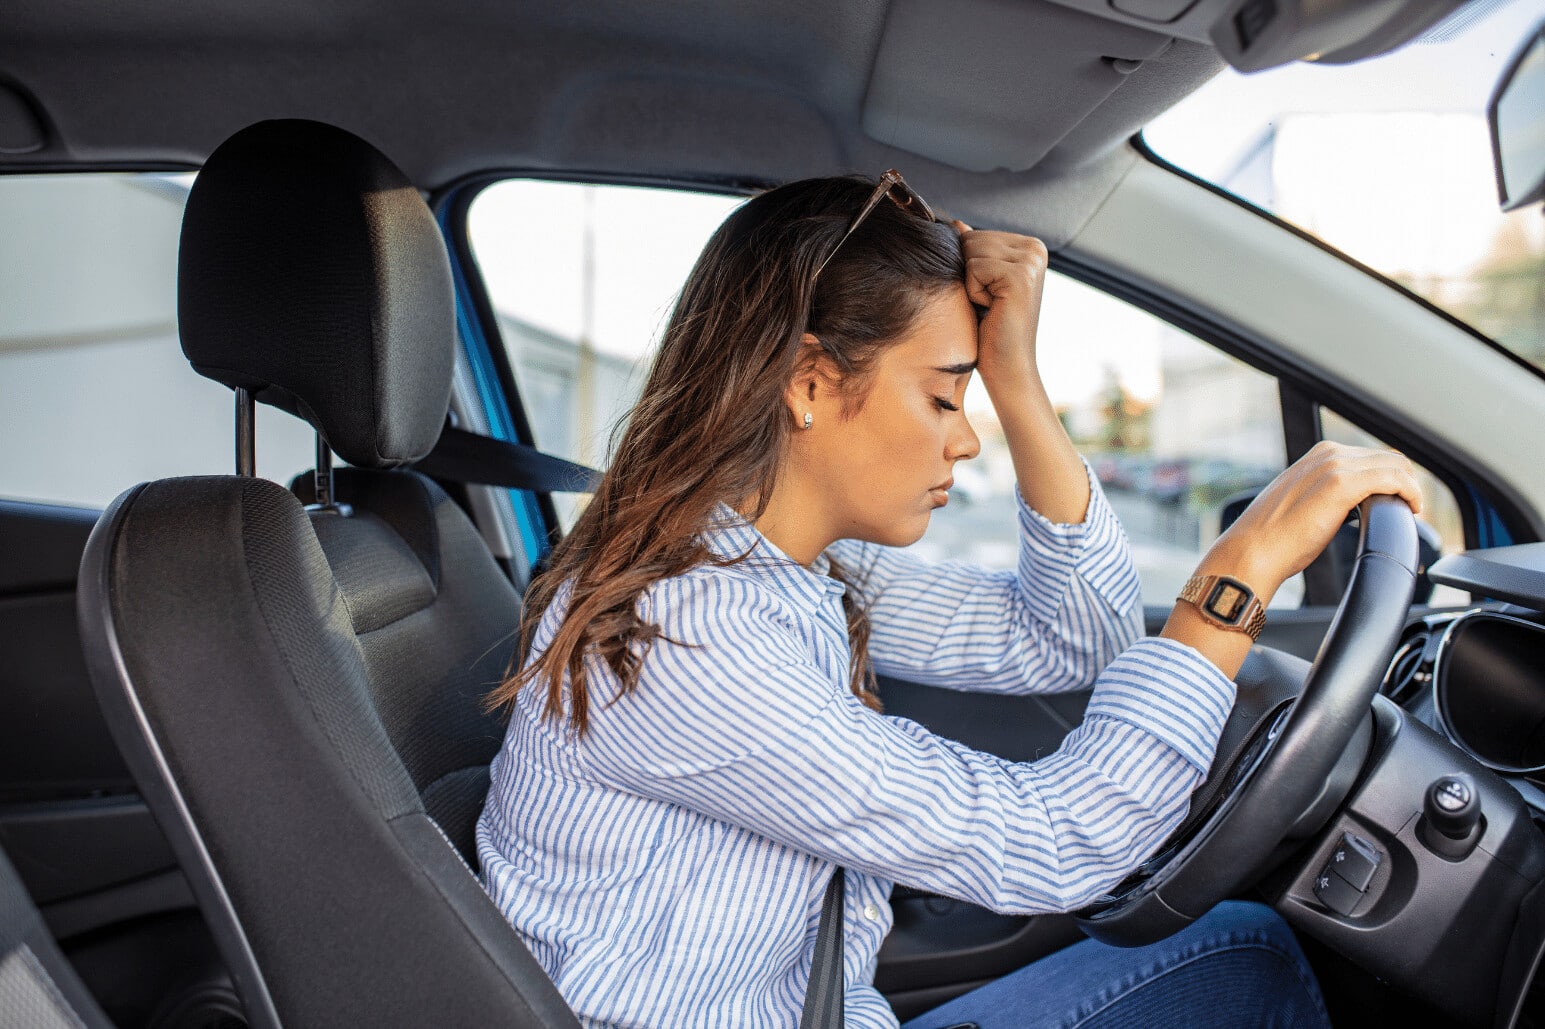 Sometimes it feels like driving anxiety is ruining my life. Image of a woman experiencing driving anxiety.